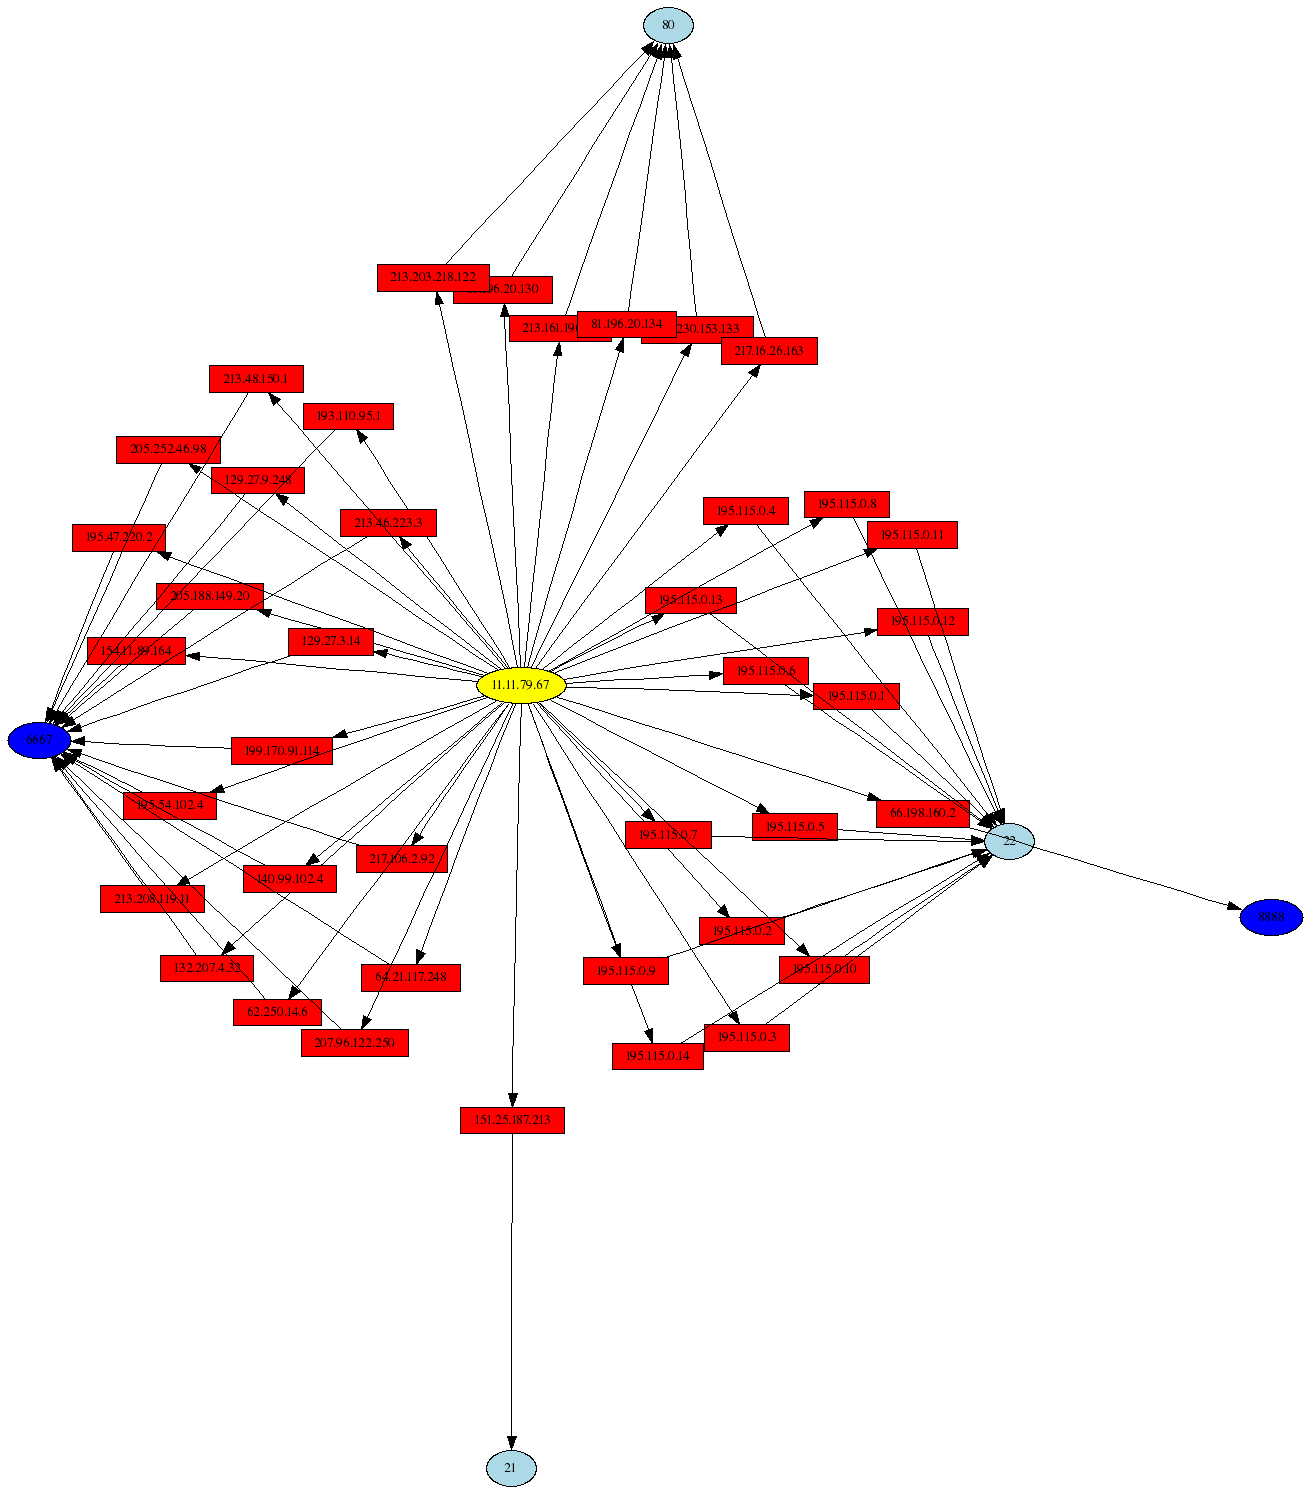 psad outbound connections visualization